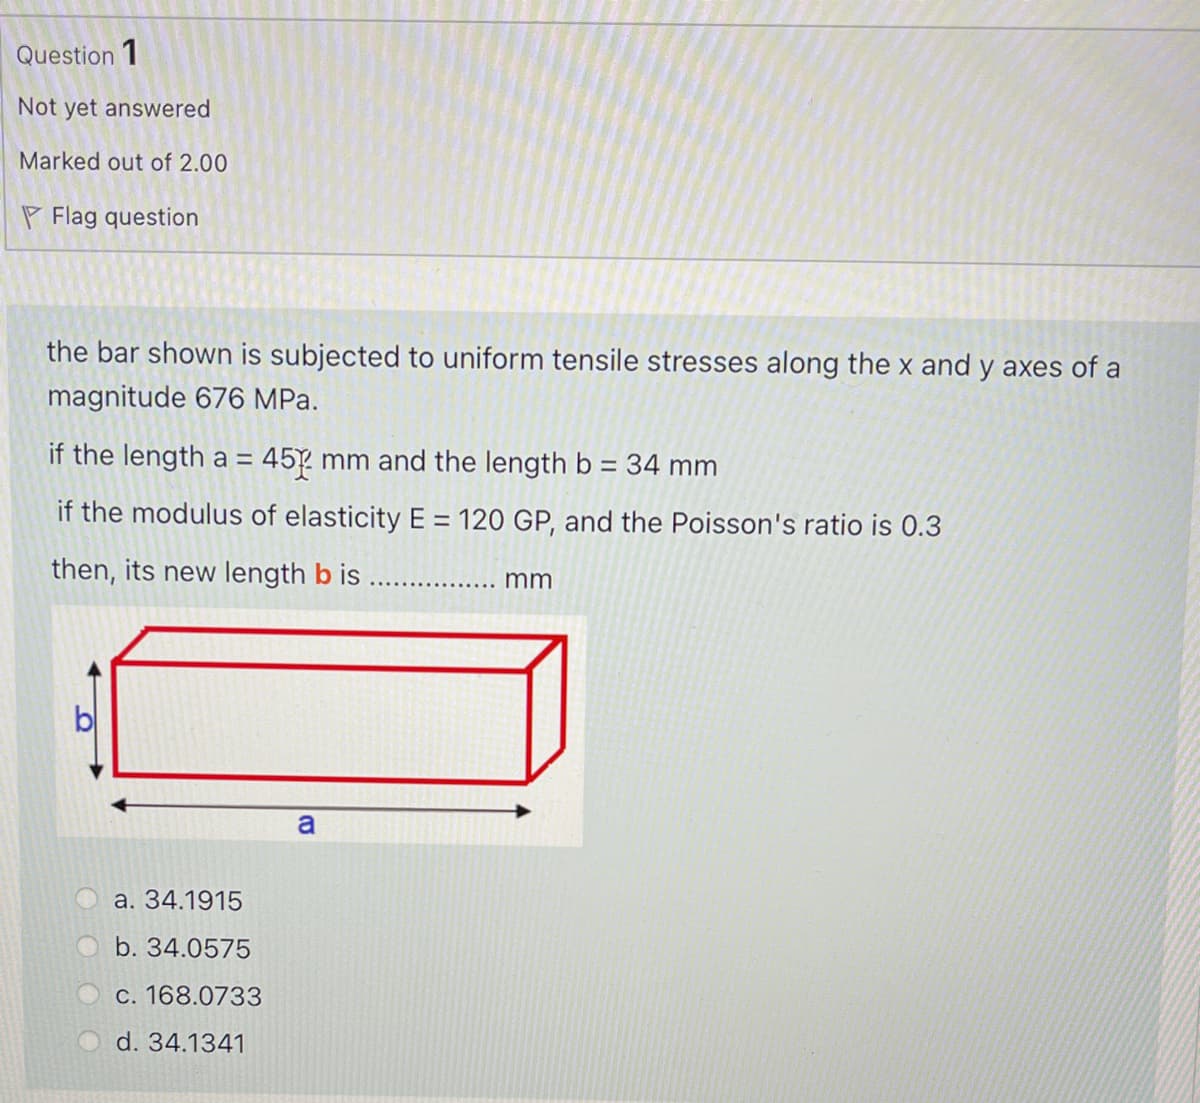 Question 1
Not yet answered
Marked out of 2.00
P Flag question
the bar shown is subjected to uniform tensile stresses along the x and y axes of a
magnitude 676 MPa.
if the length a =
45 mm and the length b = 34 mm
if the modulus of elasticity E = 120 GP, and the Poisson's ratio is 0.3
then, its new length b is
mm
a
a. 34.1915
b. 34.0575
C. 168.0733
d. 34.1341
